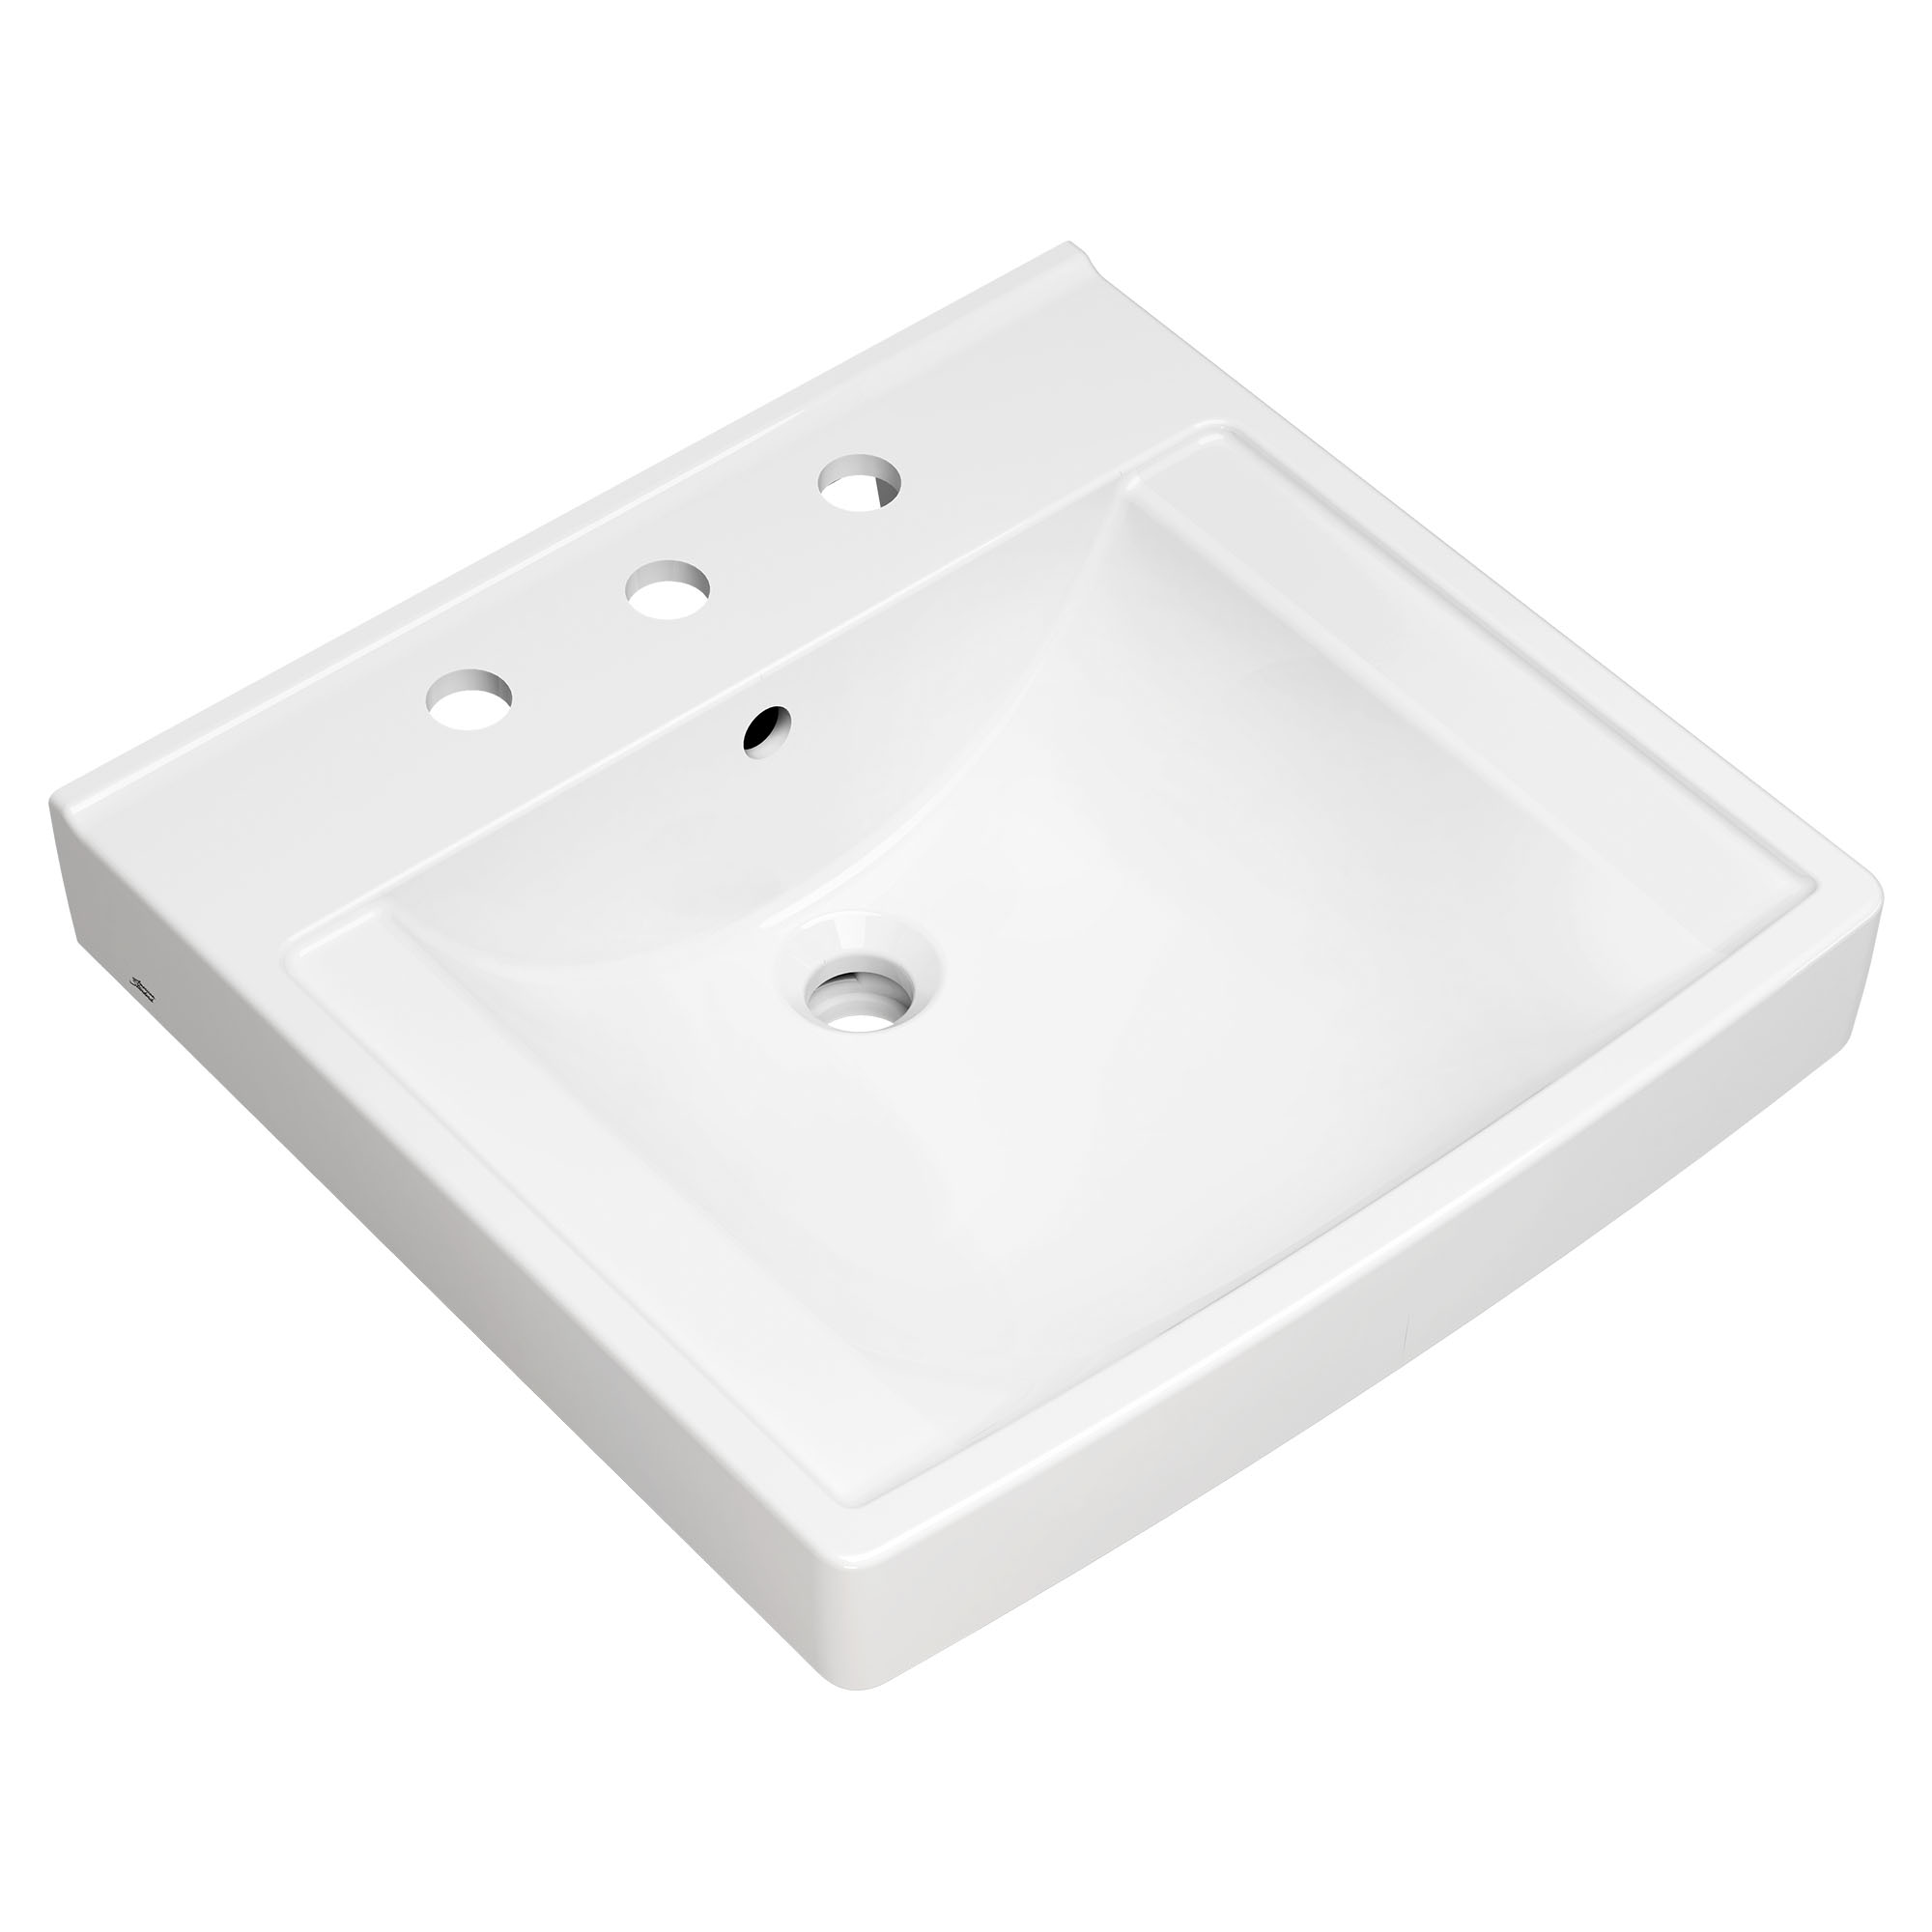 Decorum® 21 x 20-1/4-Inch (533 x 514 mm) Wall-Hung EverClean® Sink With 8-Inch Widespread